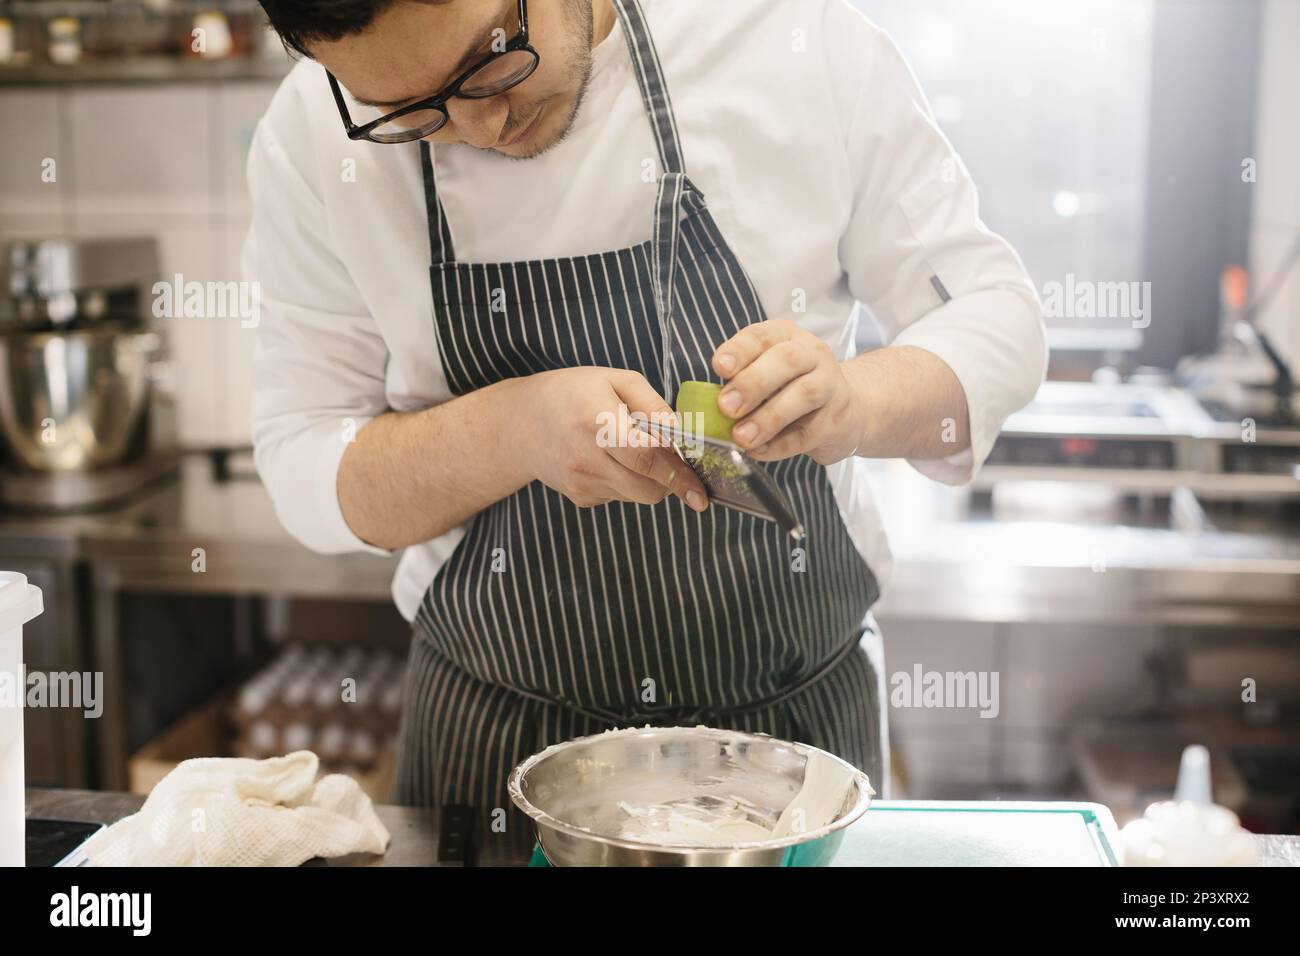 The middle section is a portrait of a chef grating lime zest. The concept of cooking in a restaurant. Stock Photo